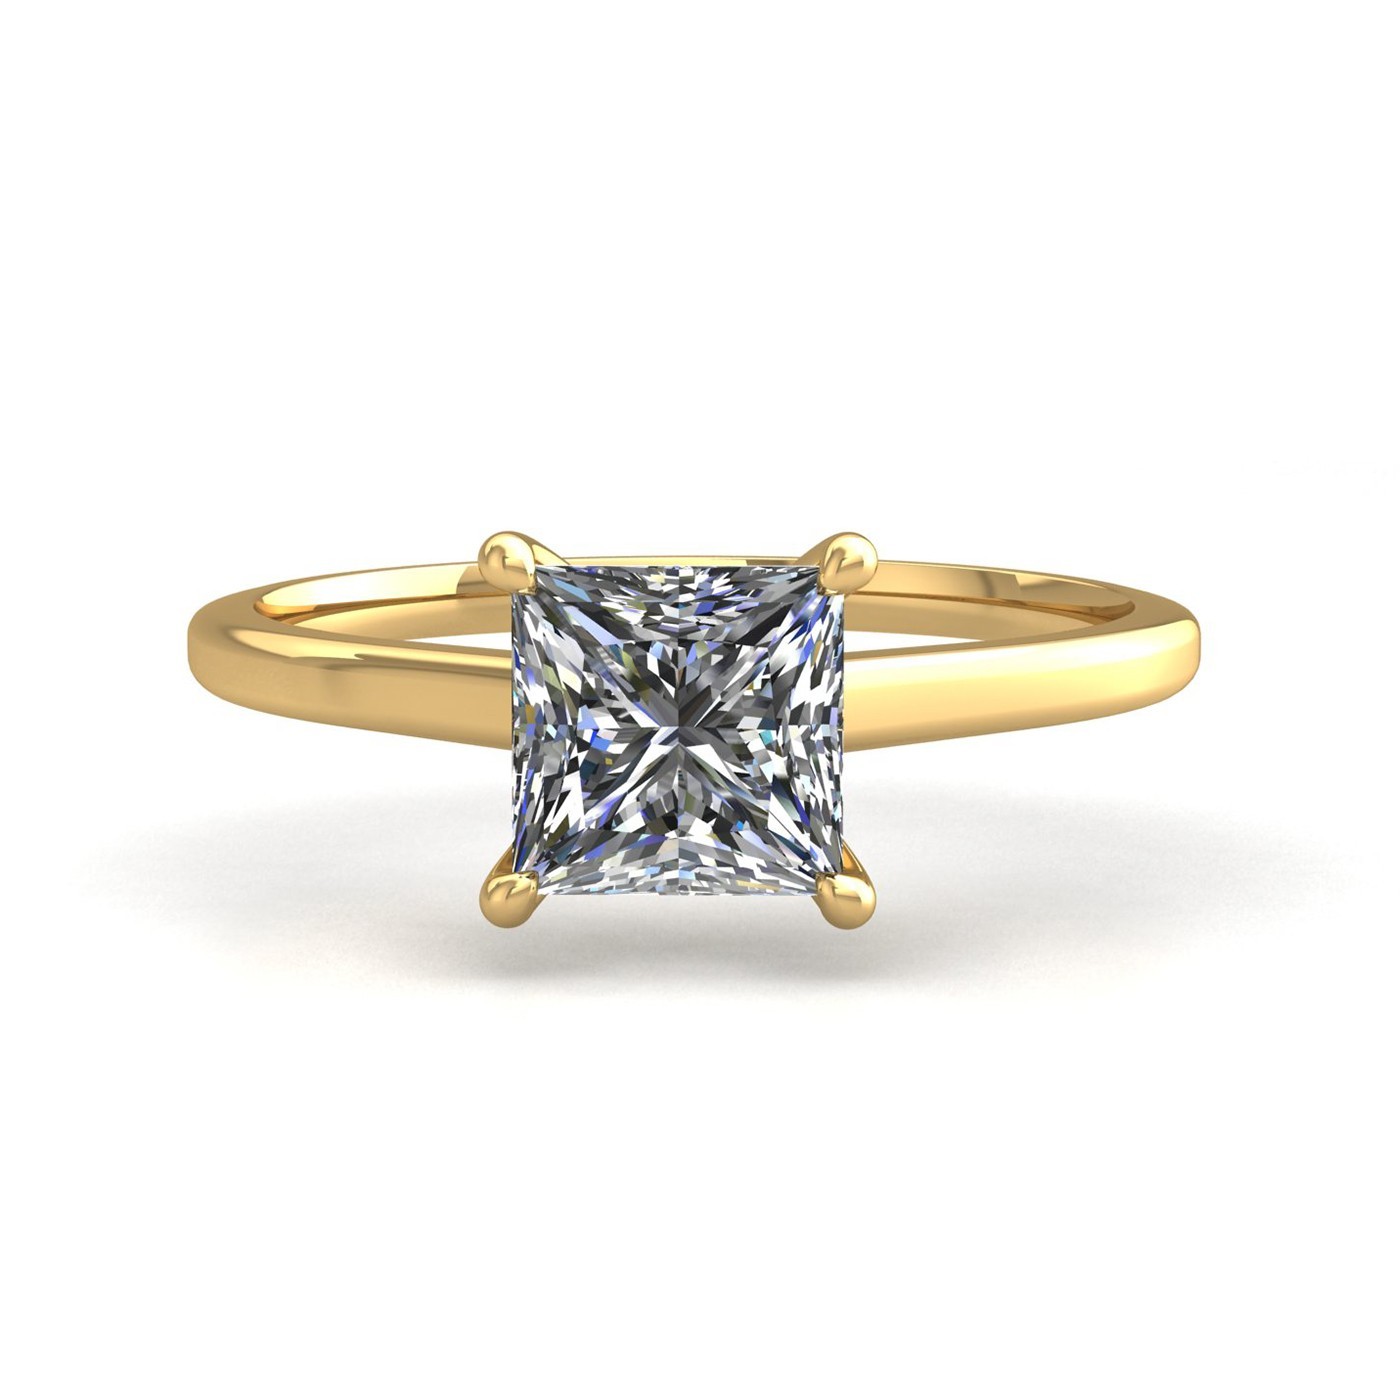 18k yellow gold  2,00 ct 4 prongs solitaire princess cut diamond engagement ring with whisper thin band Photos & images